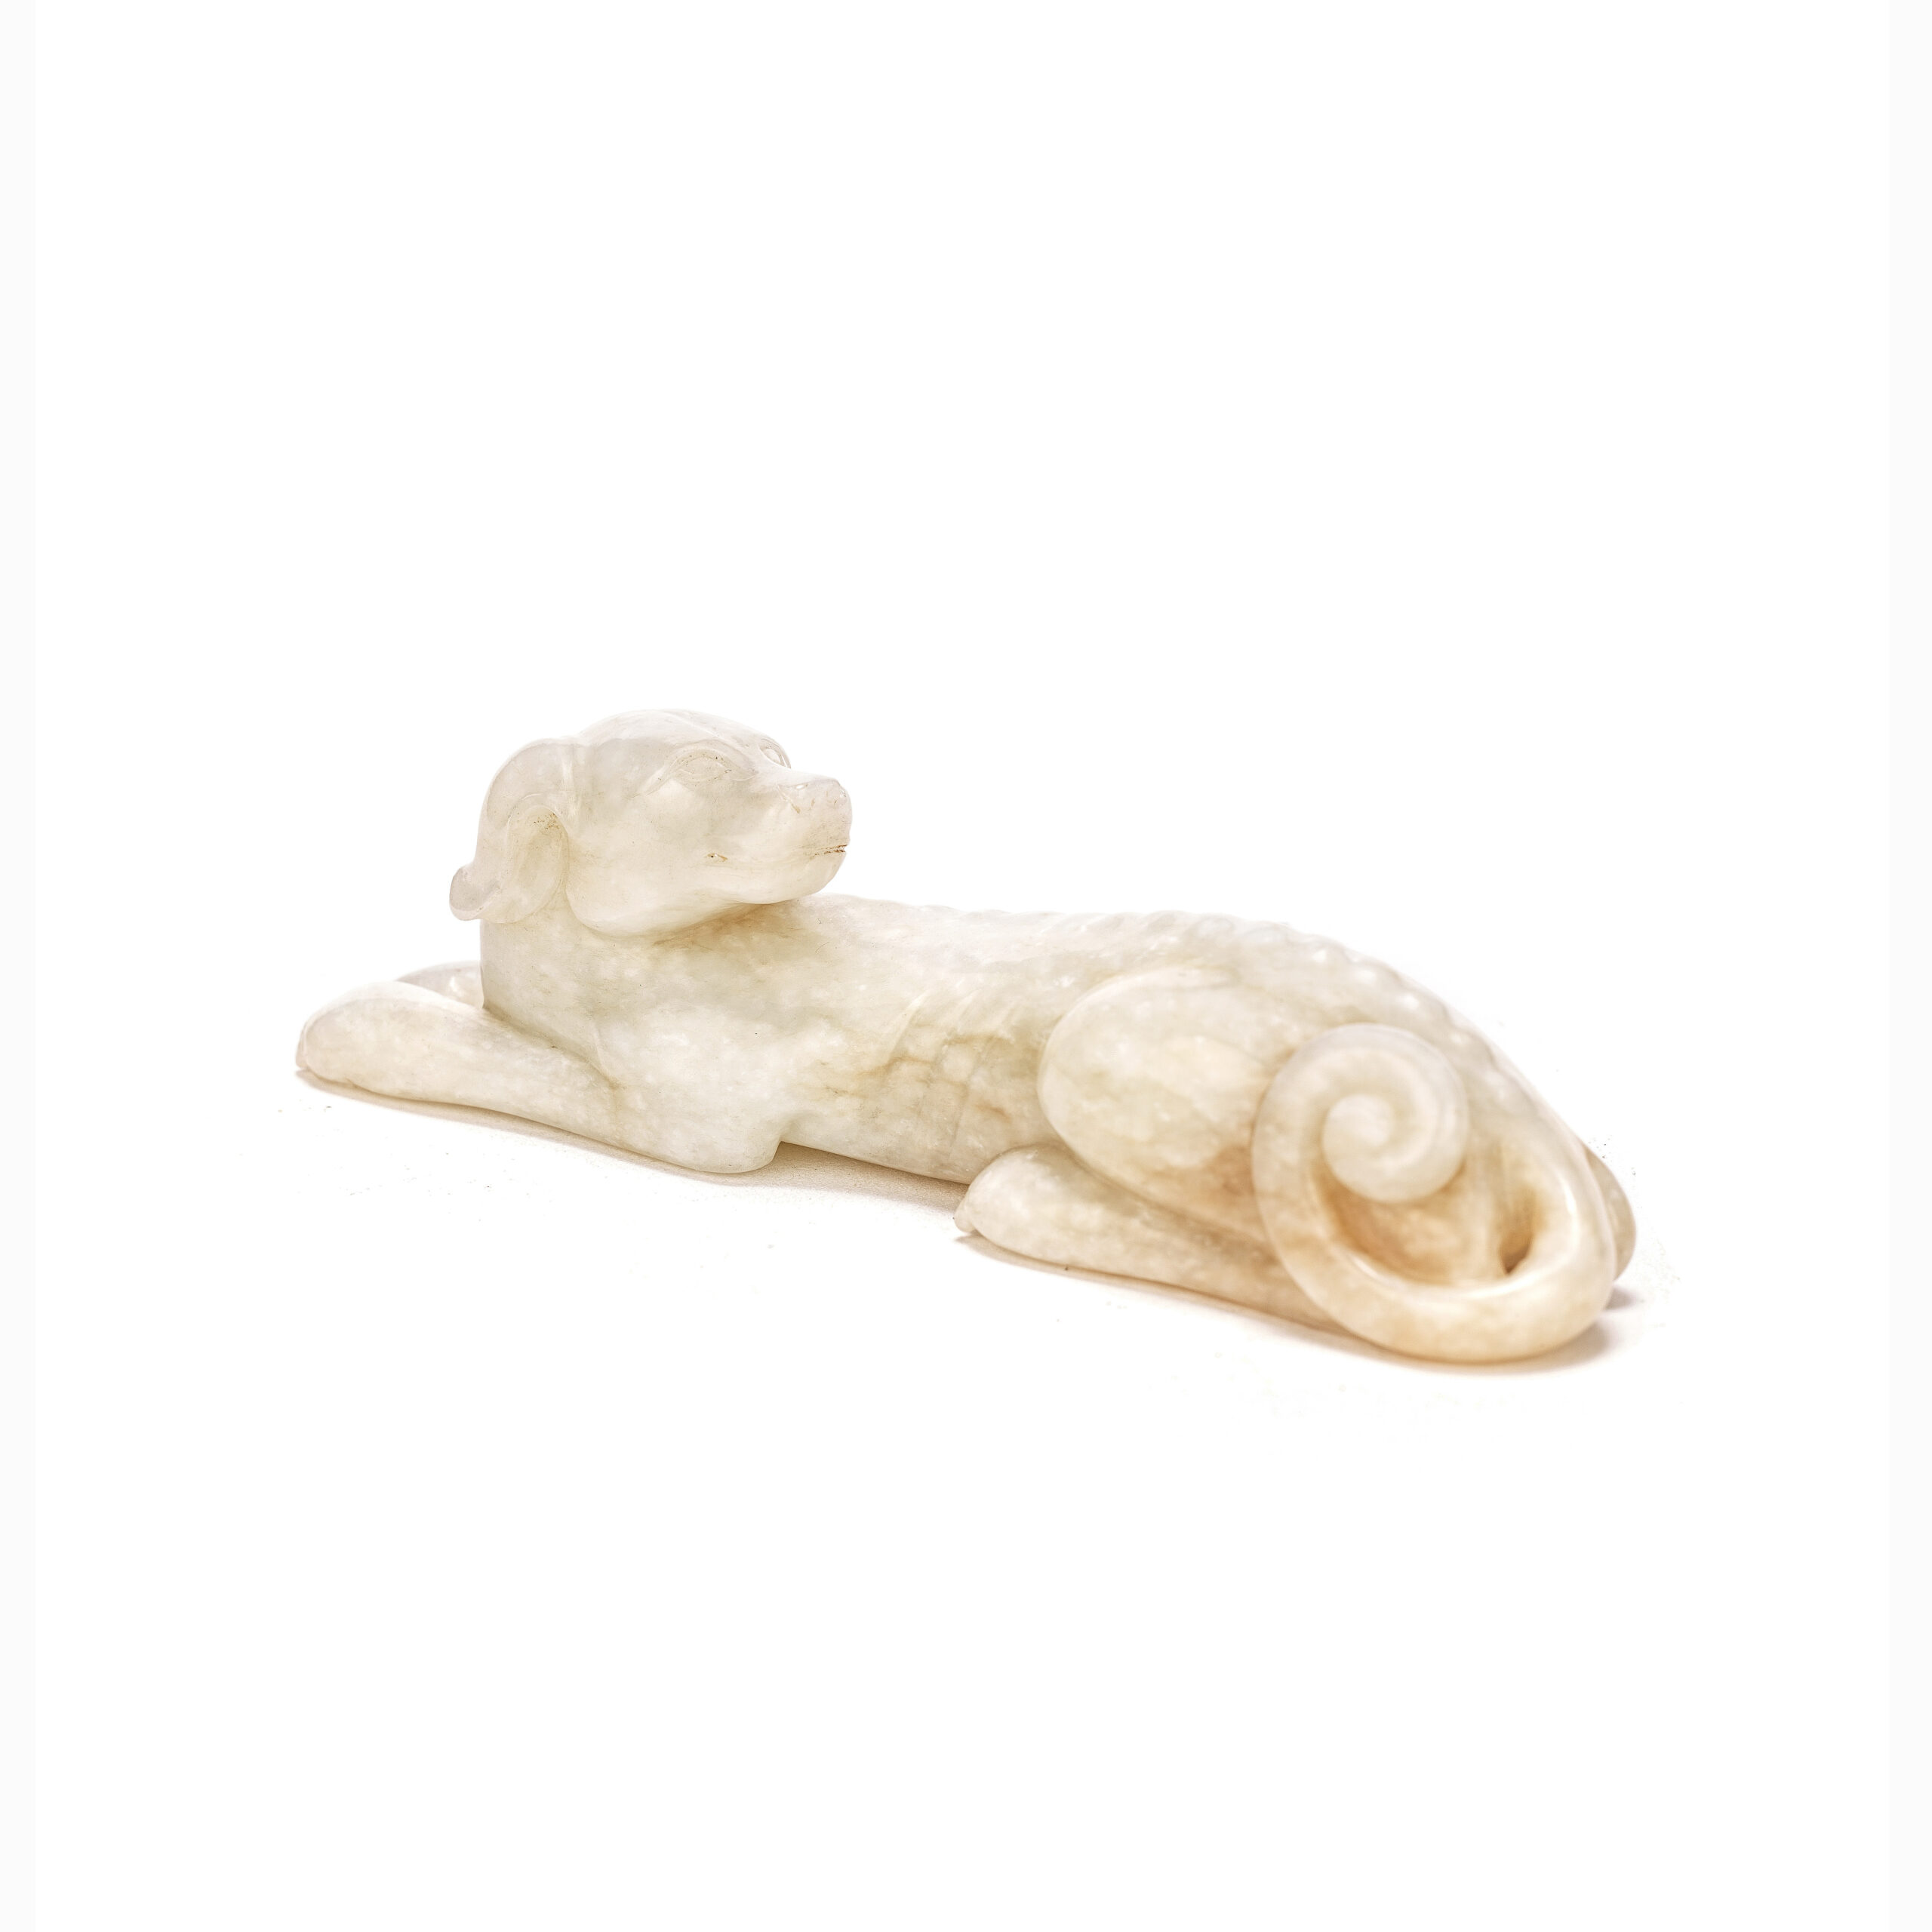 A white jade recumbent hound carving, Ming Dynasty